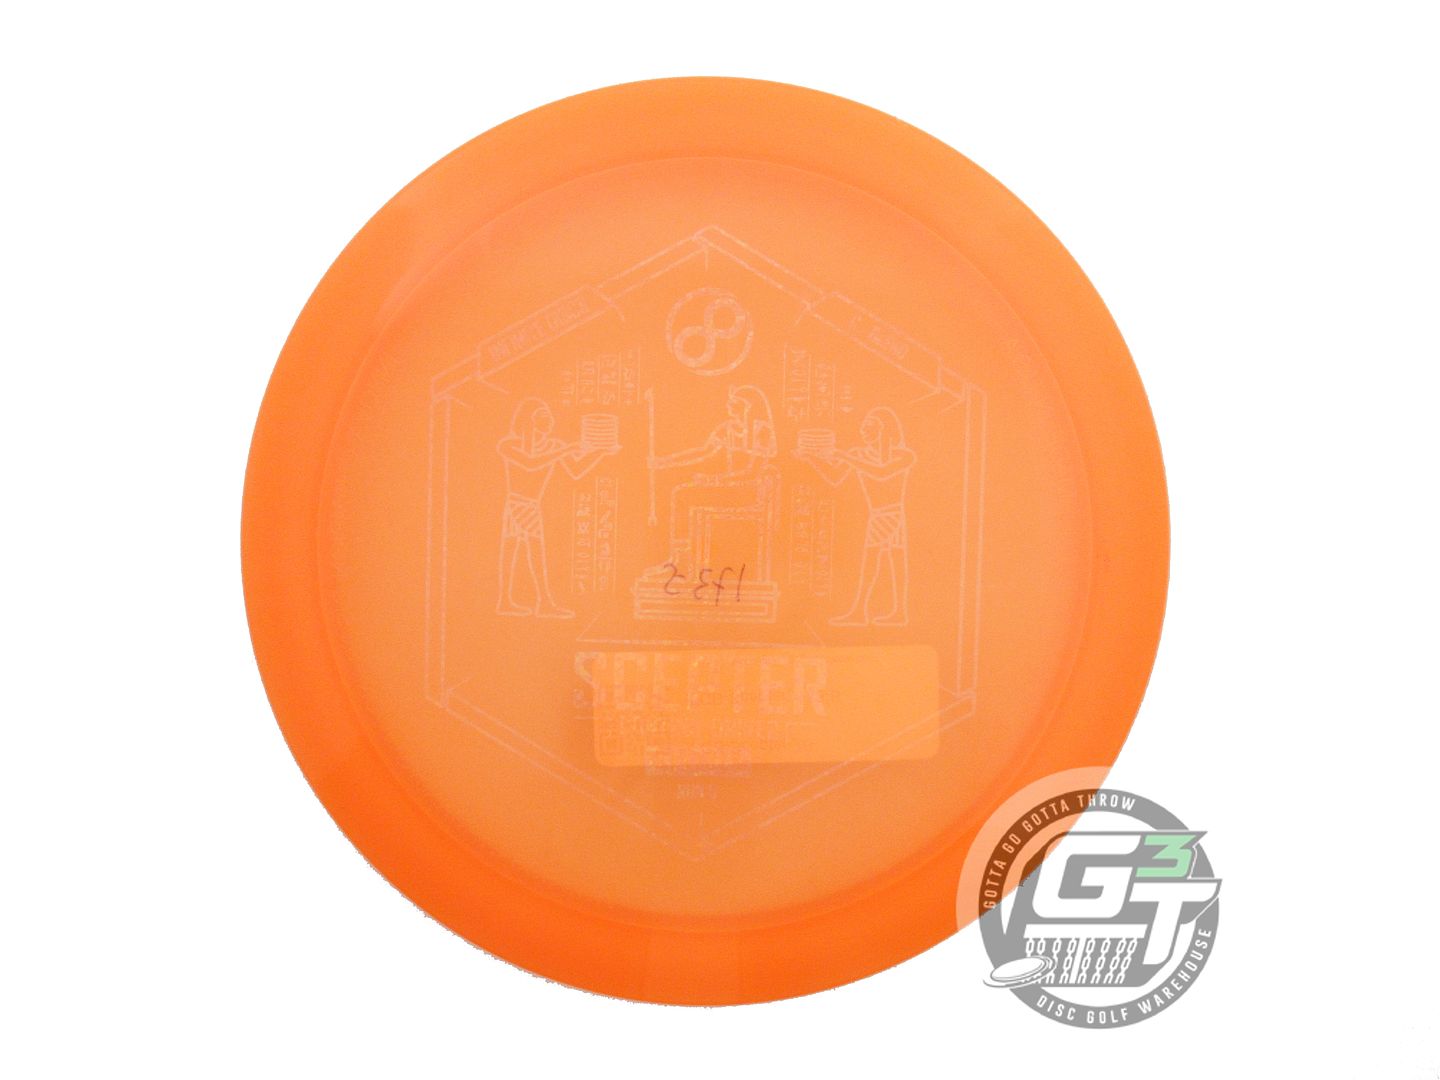 Infinite Discs C-Blend Scepter Fairway Driver Golf Disc (Individually Listed)